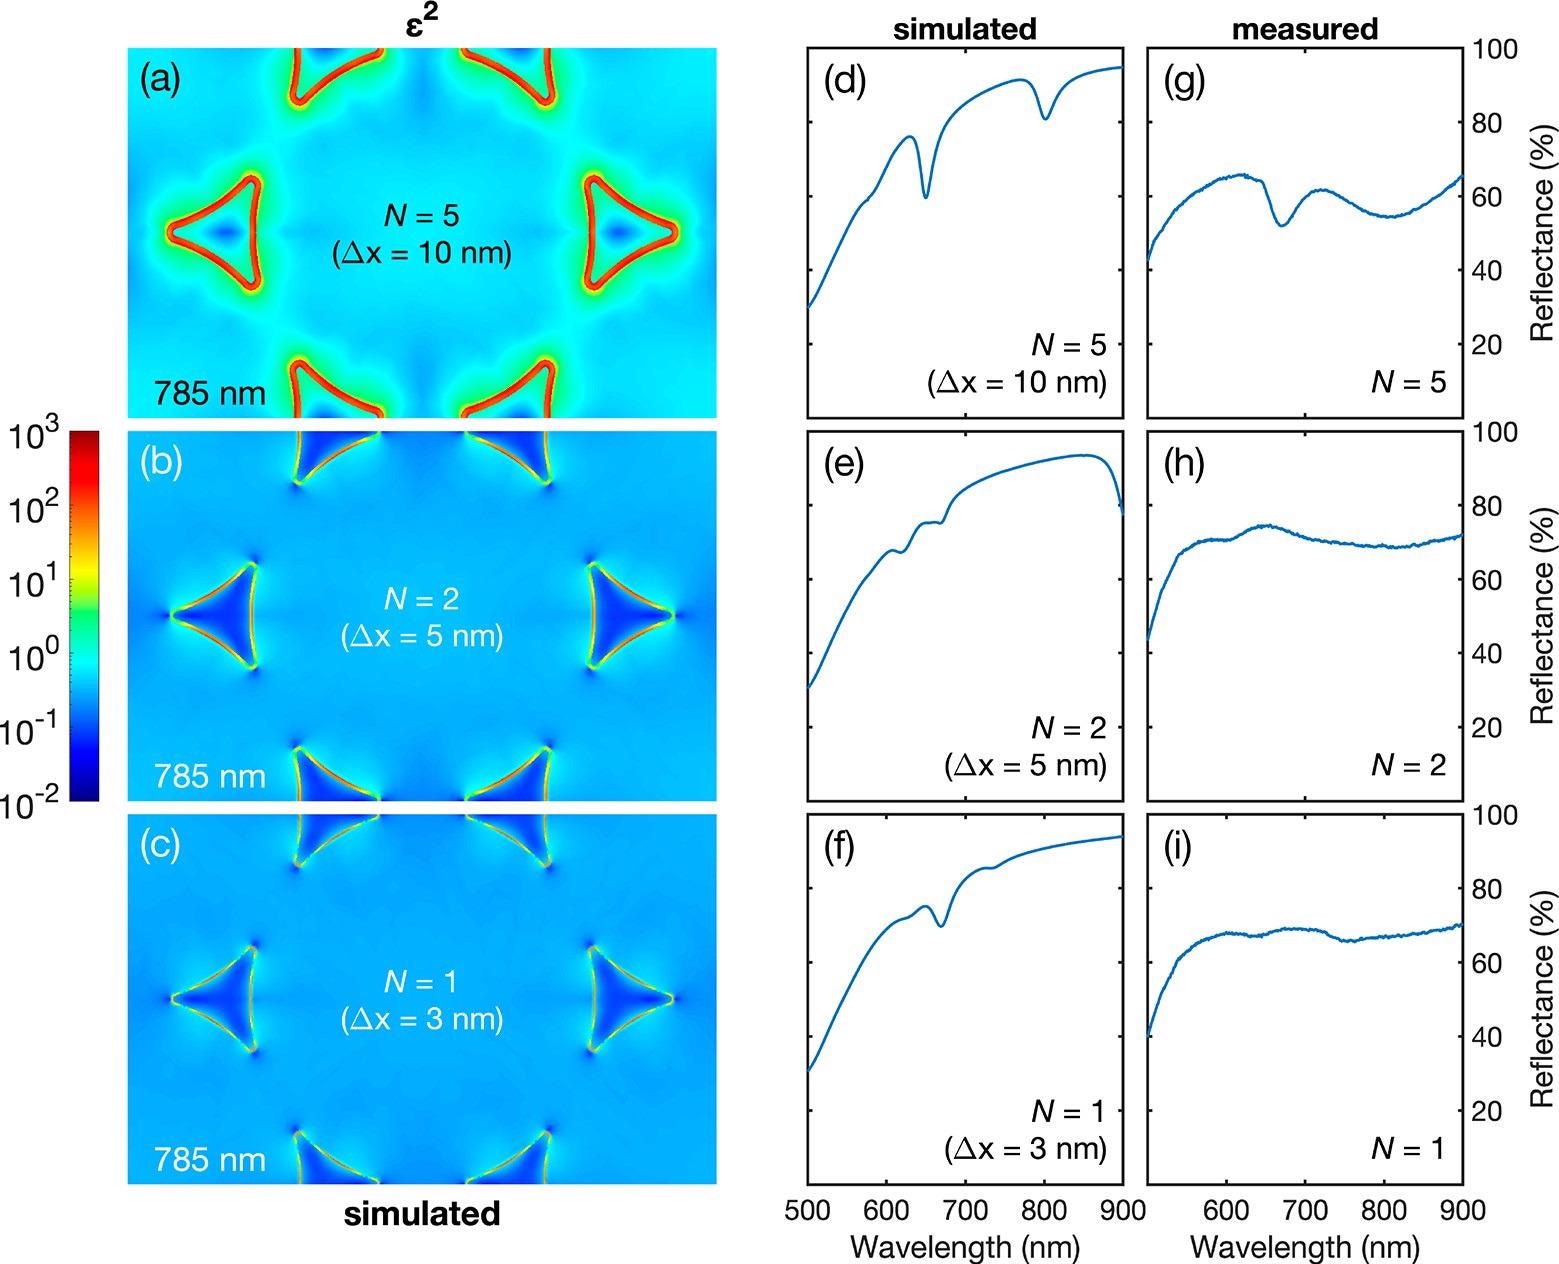 Simulated field-enhancement maps and simulated and experimental reflectance spectra for Au/Au TNG arrays. (a)–(c) Simulated plots showing the square of the field enhancement e at a height z* = 30 nm above the glass substrate (i.e., coincident with the top surface of Au-2) for gap widths of 3 nm (N = 1), 5 nm (N = 2), and 10 nm (N = 5), assuming an unpolarized plane wave illumination at 785 nm. (d)–(f) Simulated reflectance spectra for gap widths of 3 nm (N = 1), 5 nm (N = 2), and 10 nm (N = 5), assuming an unpolarized, monochromatic plane-wave illumination in the range 500–900 nm. (g)–(i) Experimentally determined reflectance spectra for N = 1, N = 2, and N = 5 TNG arrays, using an unpolarized monochromatic, plane-wave illumination in the range 500–900 nm.